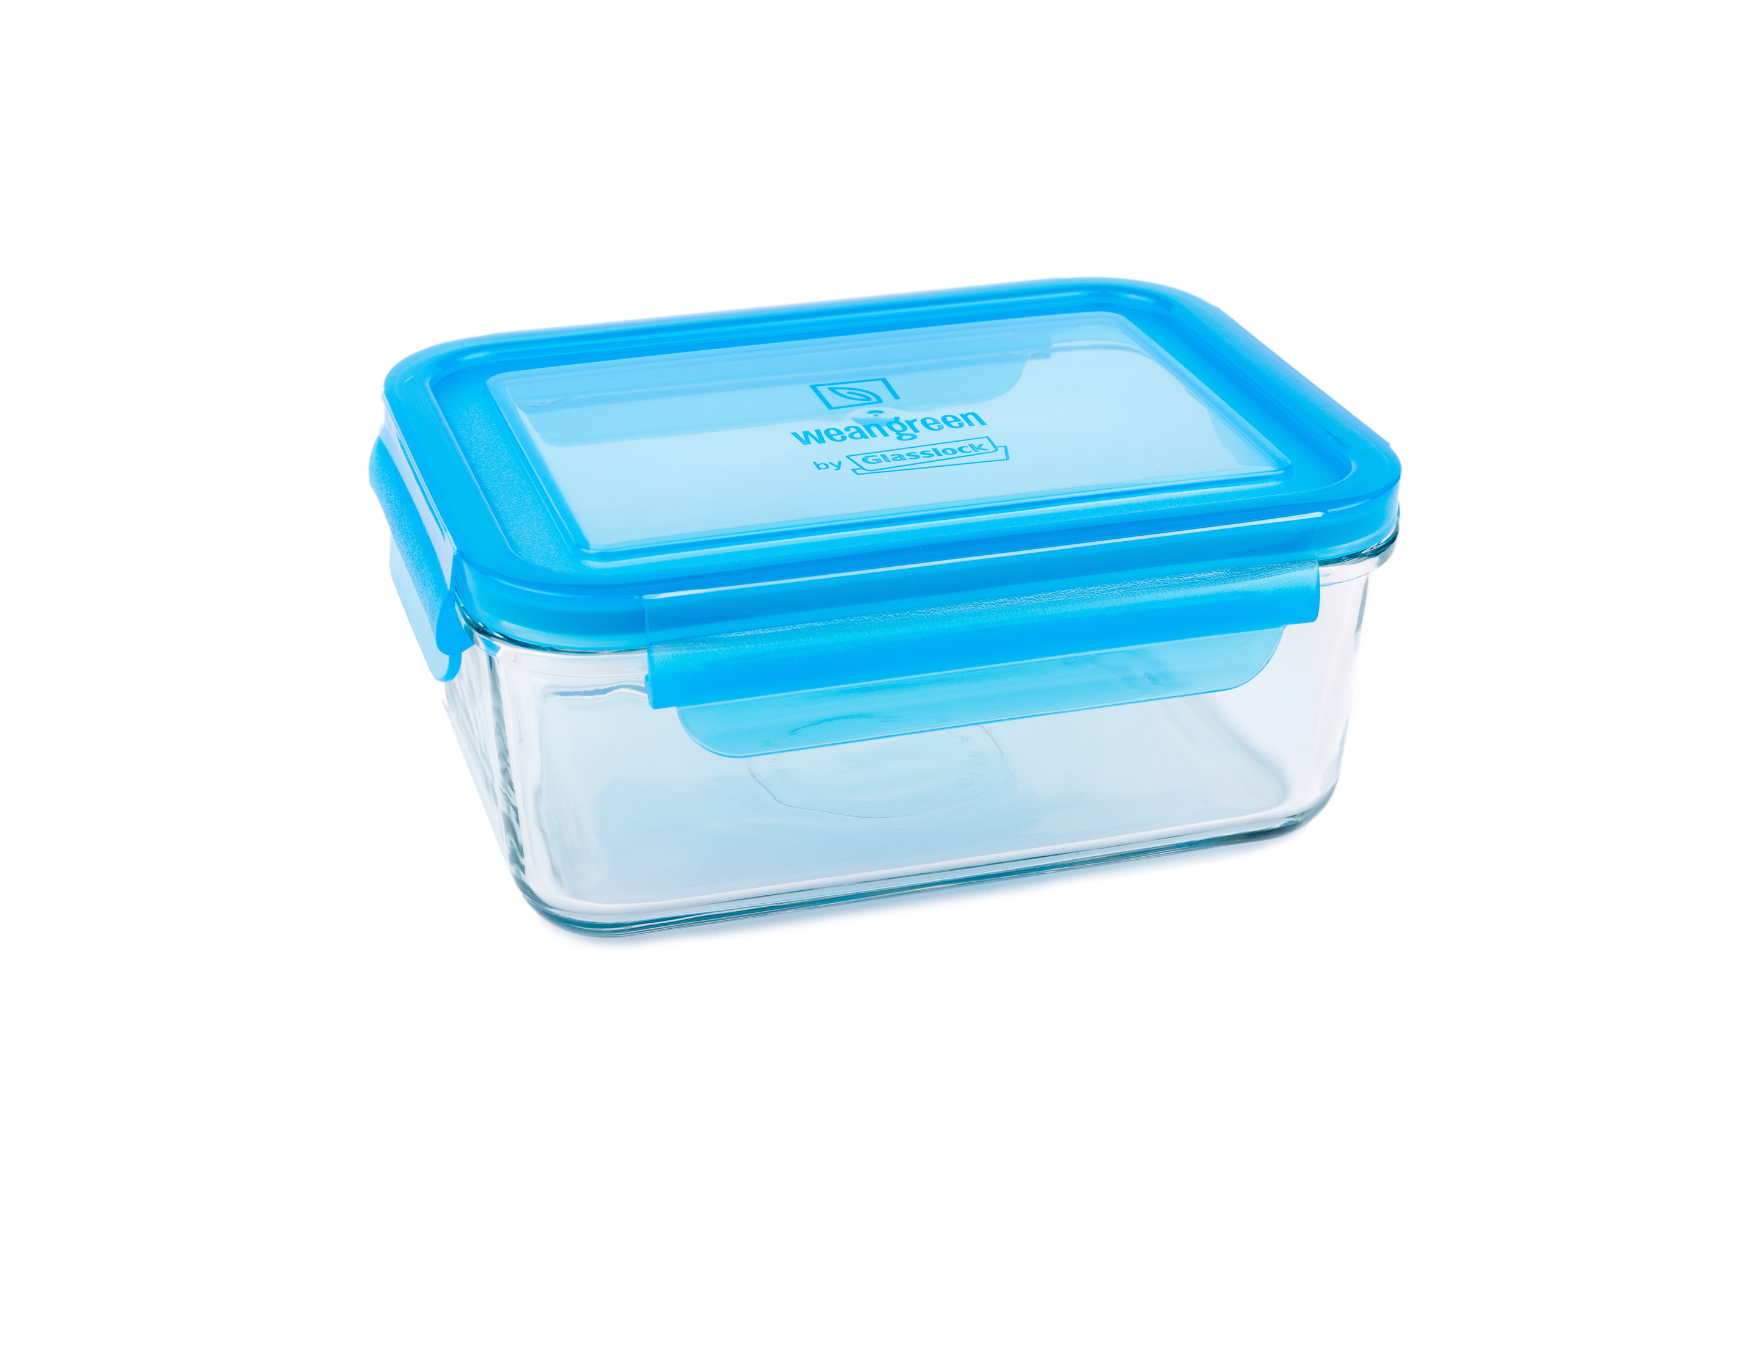 Wean Green Tempered Glass Food Container Blueberry 36oz